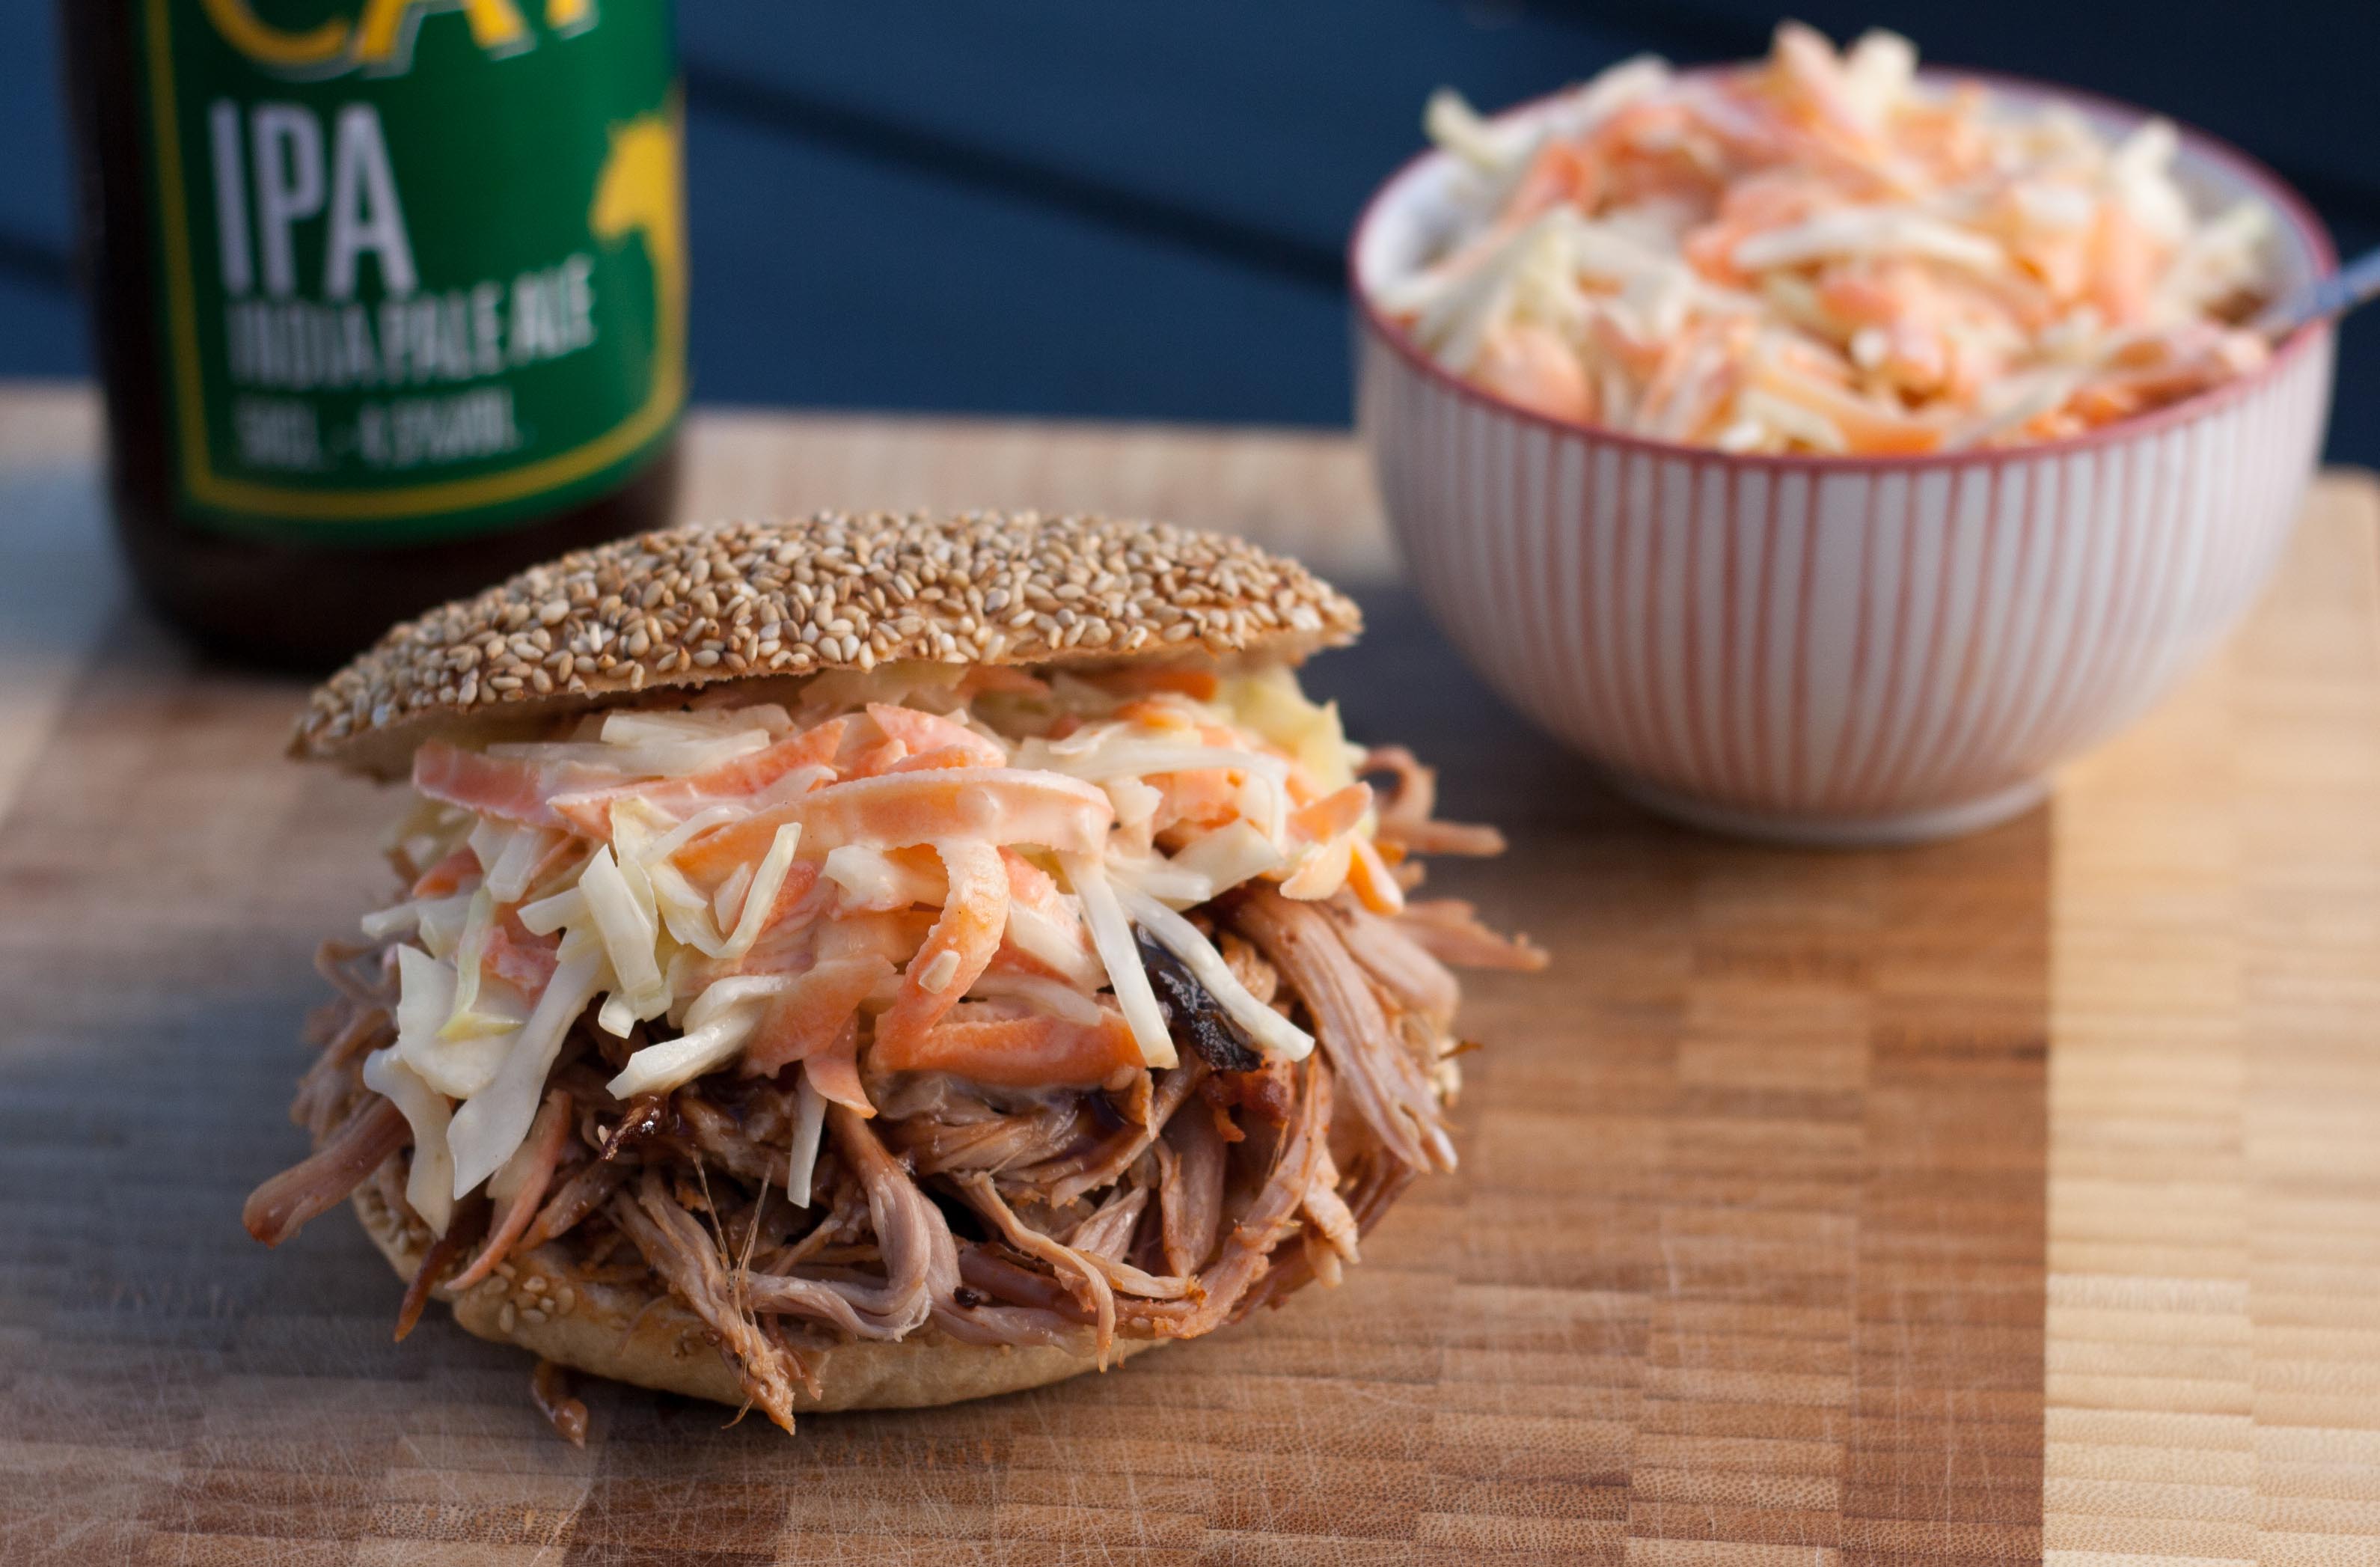 Pulled Pork with Burger Buns and Coleslaw